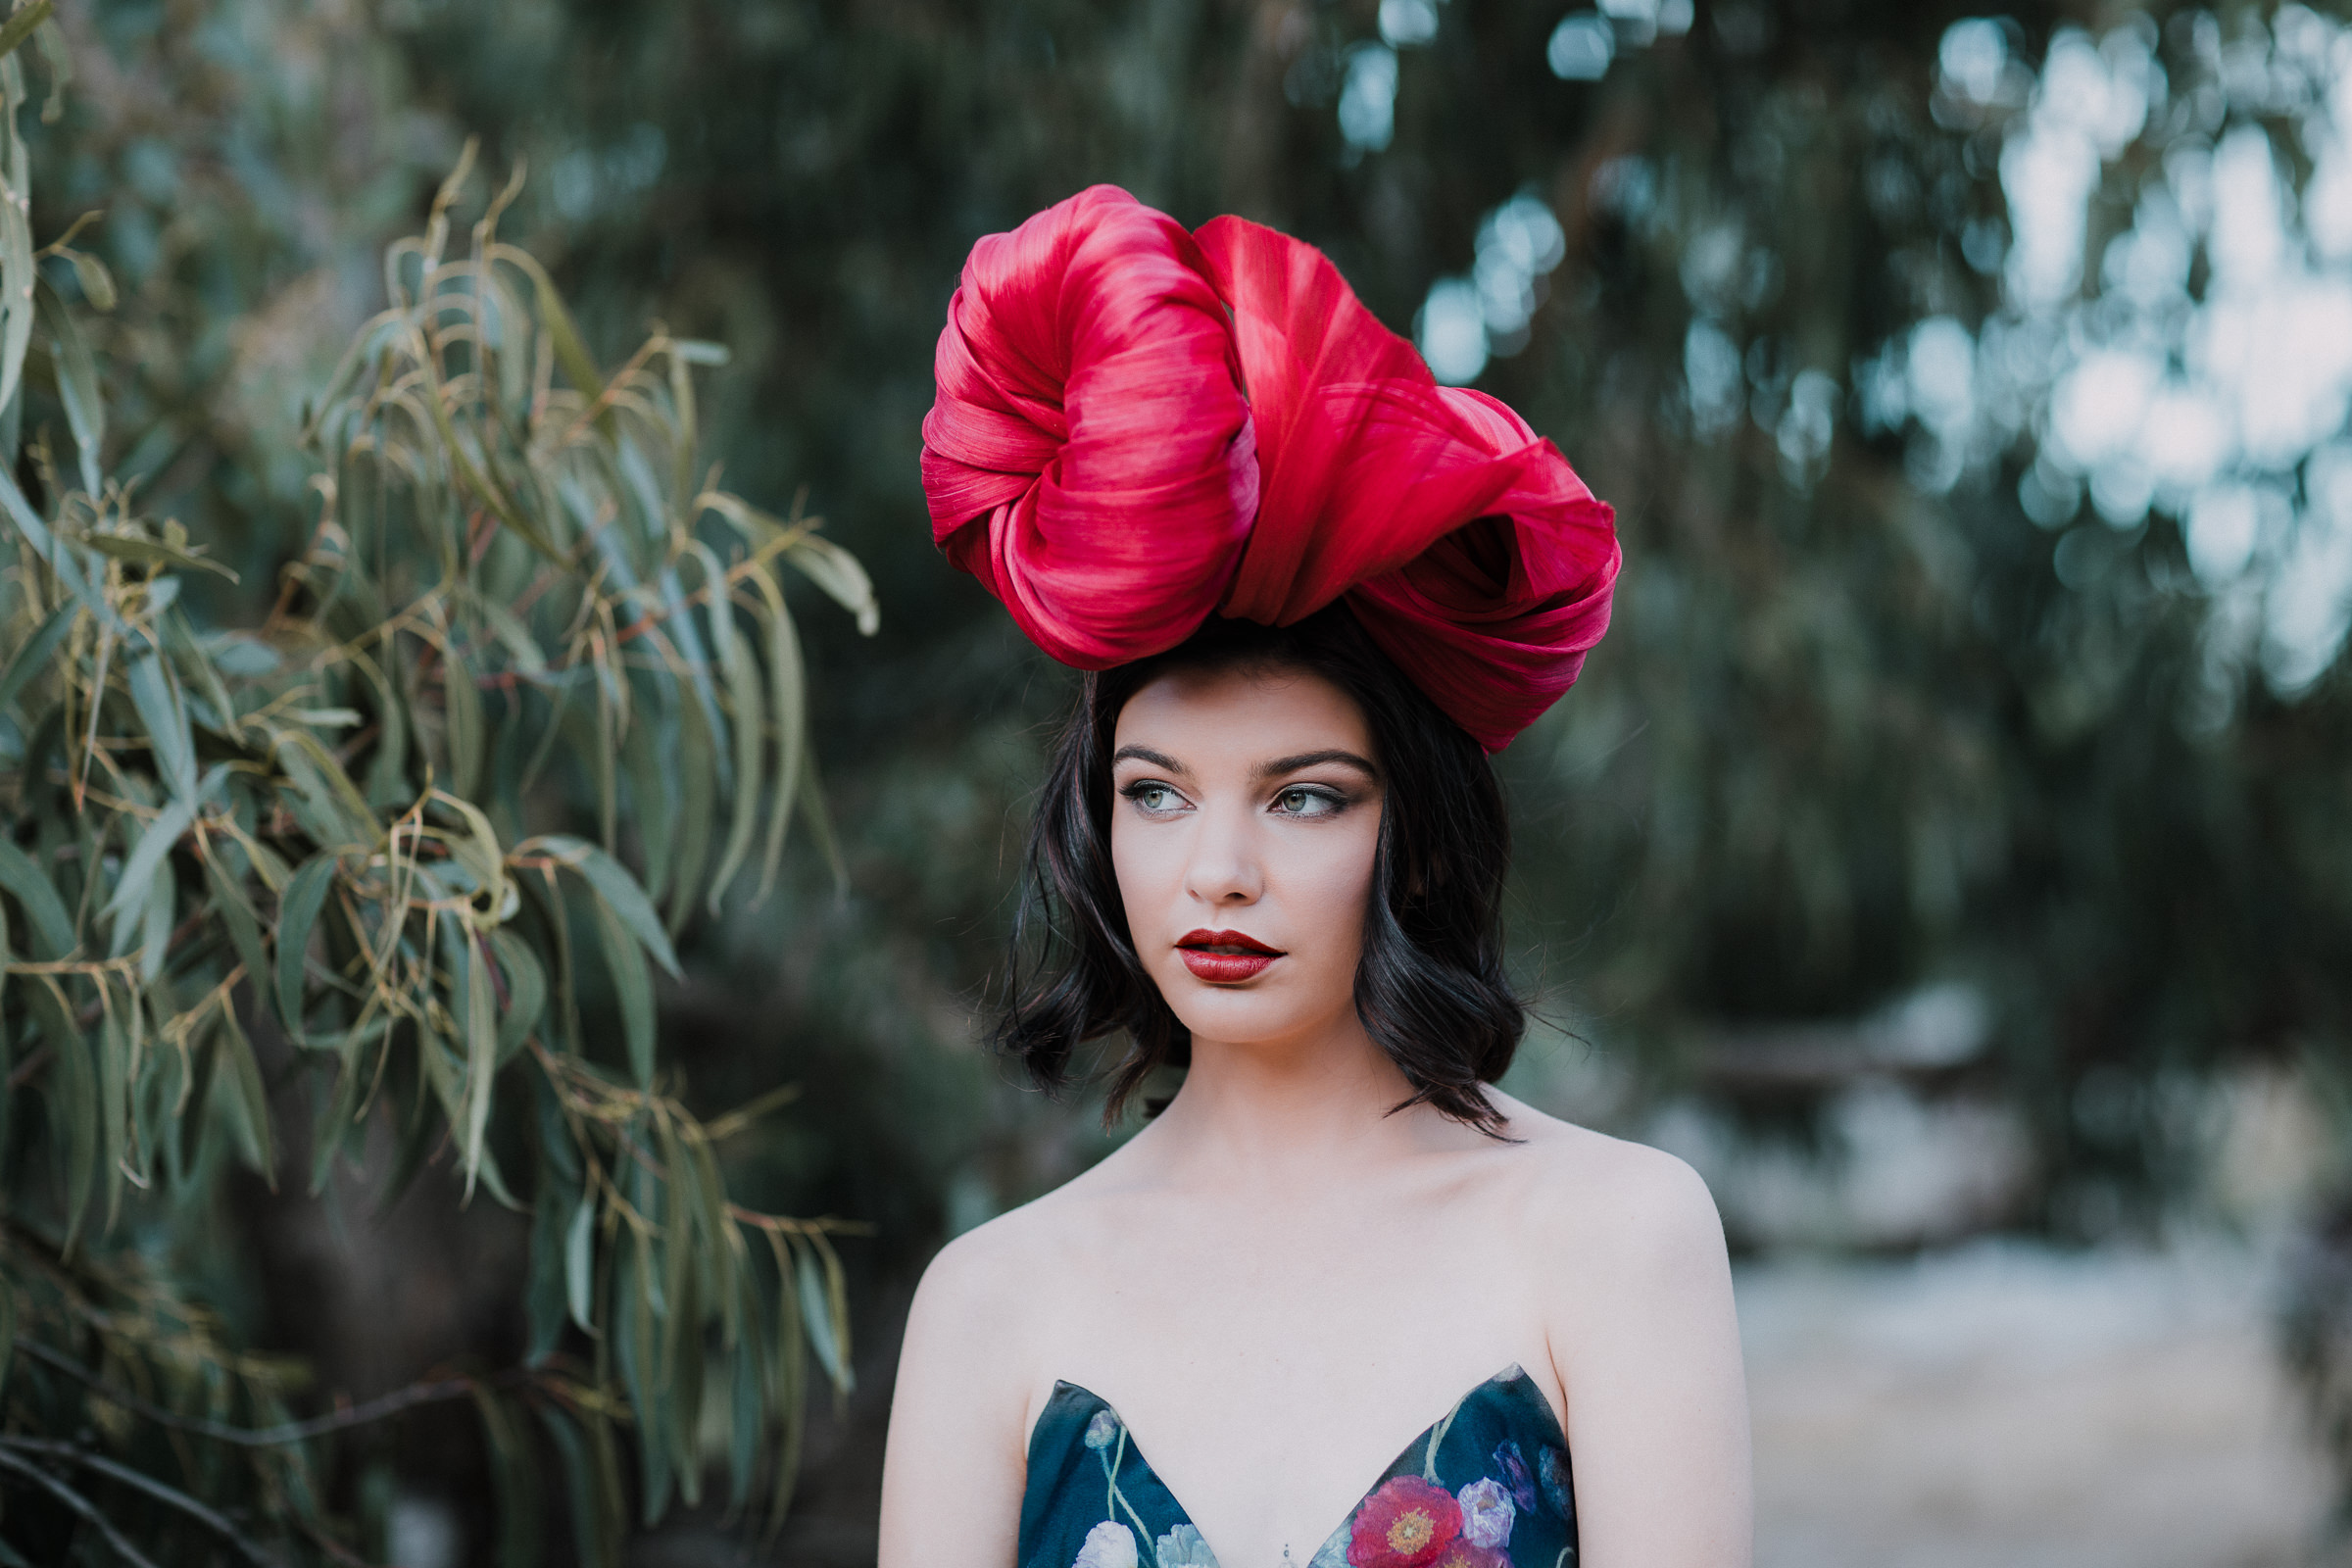 standout pieces for the Melbourne spring racing carnival